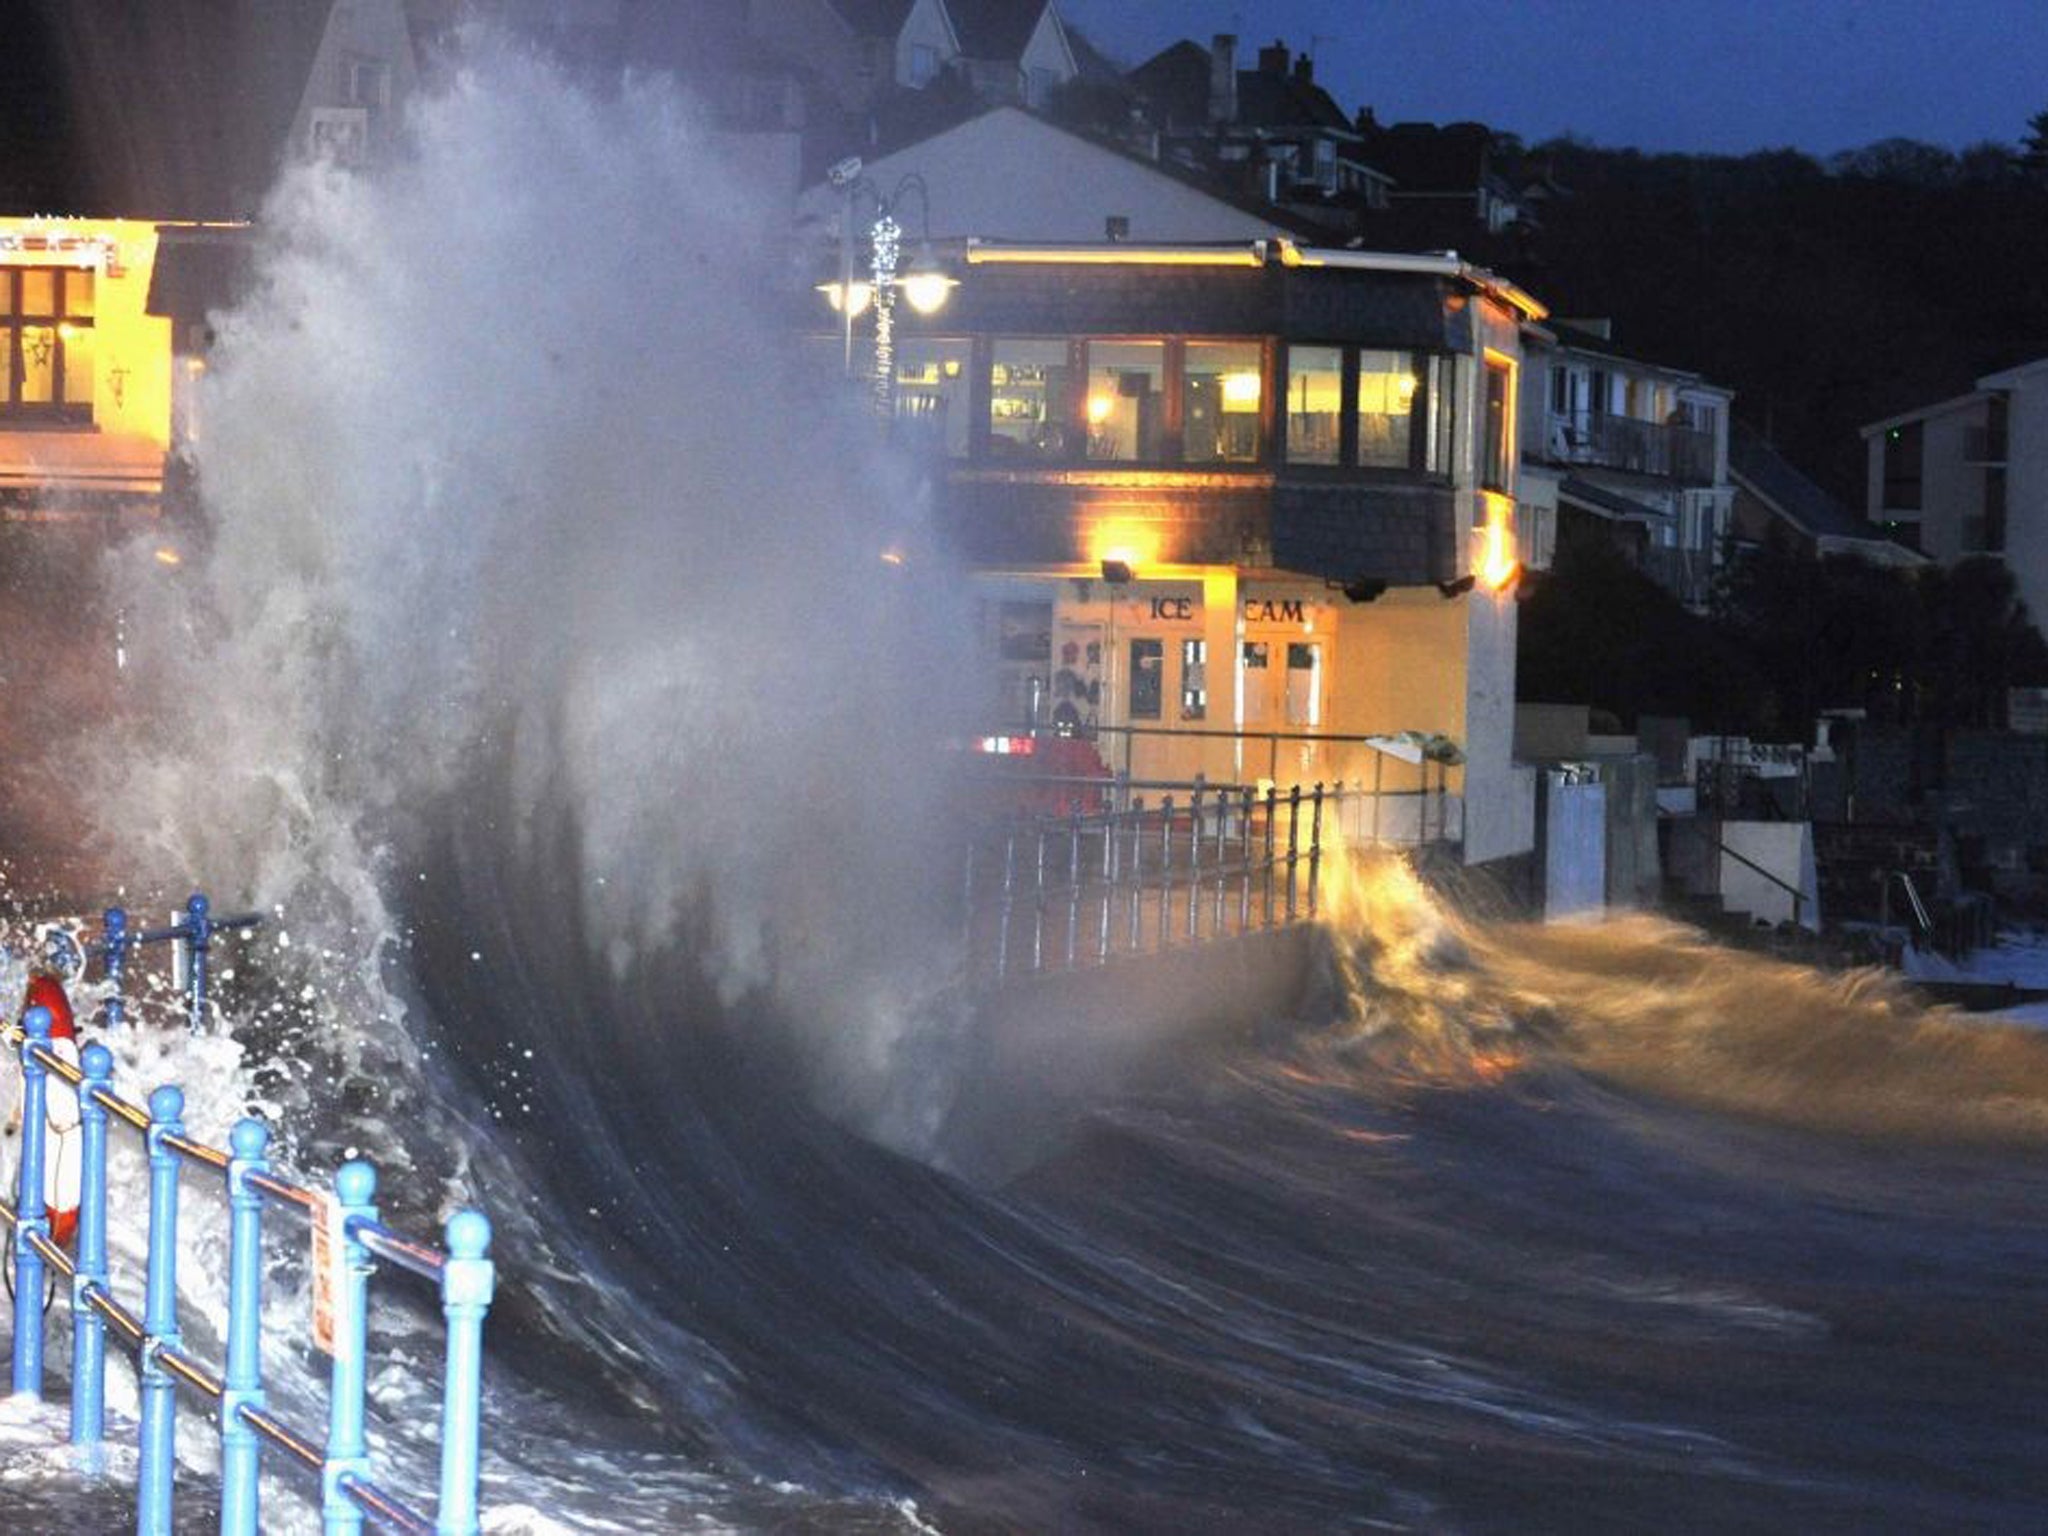 Waves crash over the promenade at hightide in Saundersfoot, in west Wales